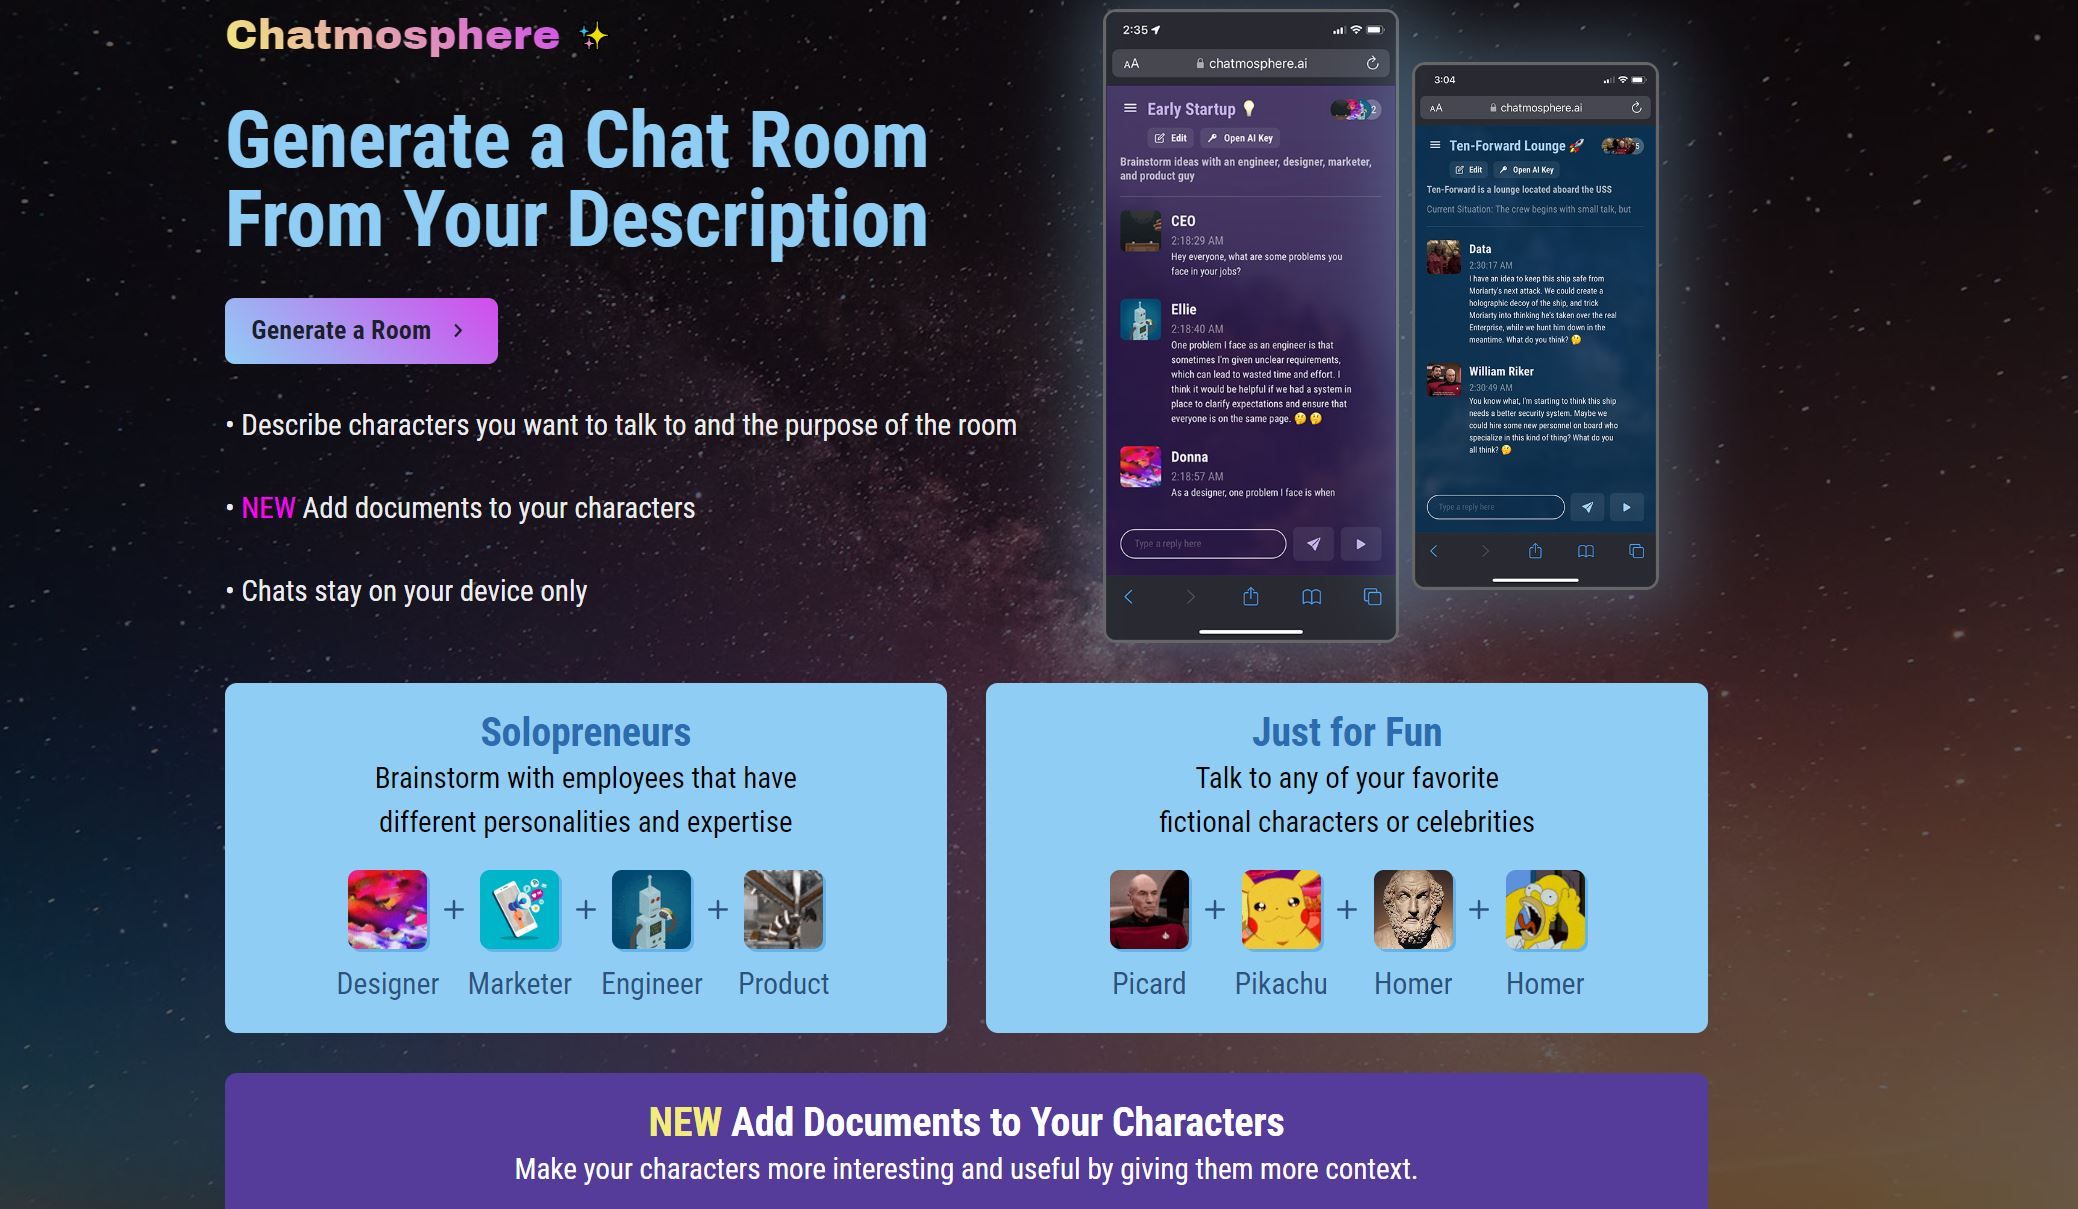  Chat with favorite characters or brainstorm in a